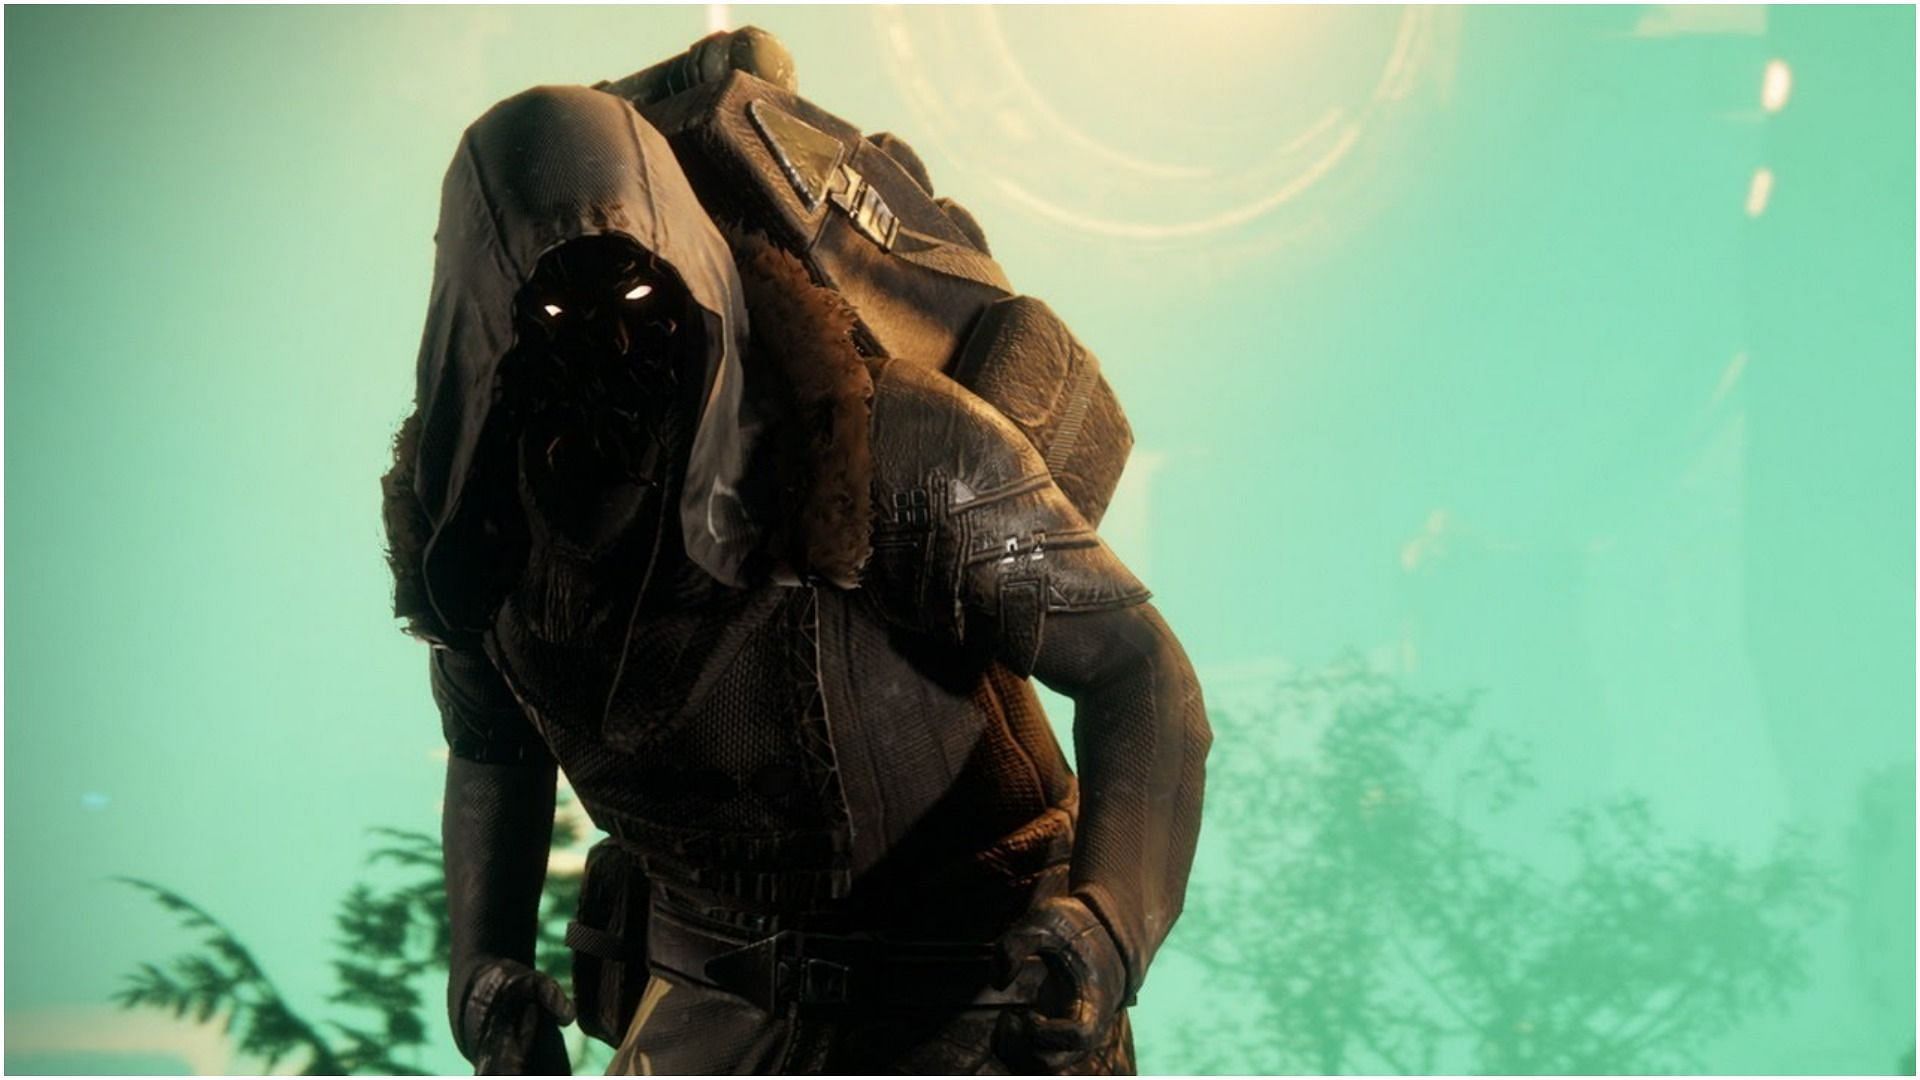 Xur is located in Nessus for this weekend in Destiny 2 (Image via Bungie)